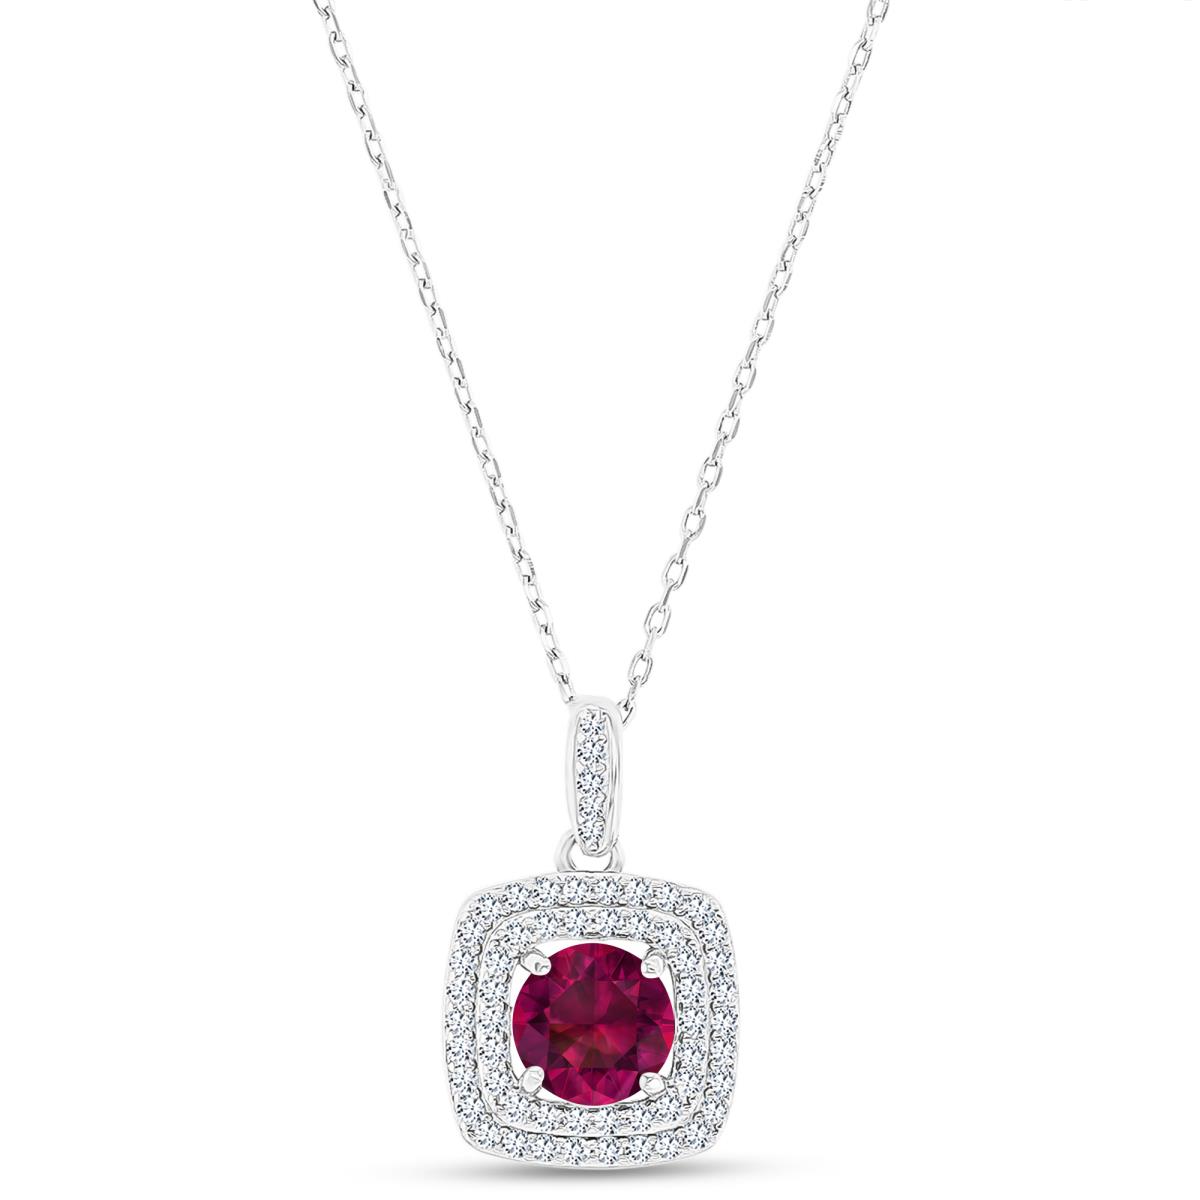 Sterling Silver Rhodium 7mm RD Cr Ruby/ Cr White Sapphire Cushion Double Halo 16"+2" Necklace